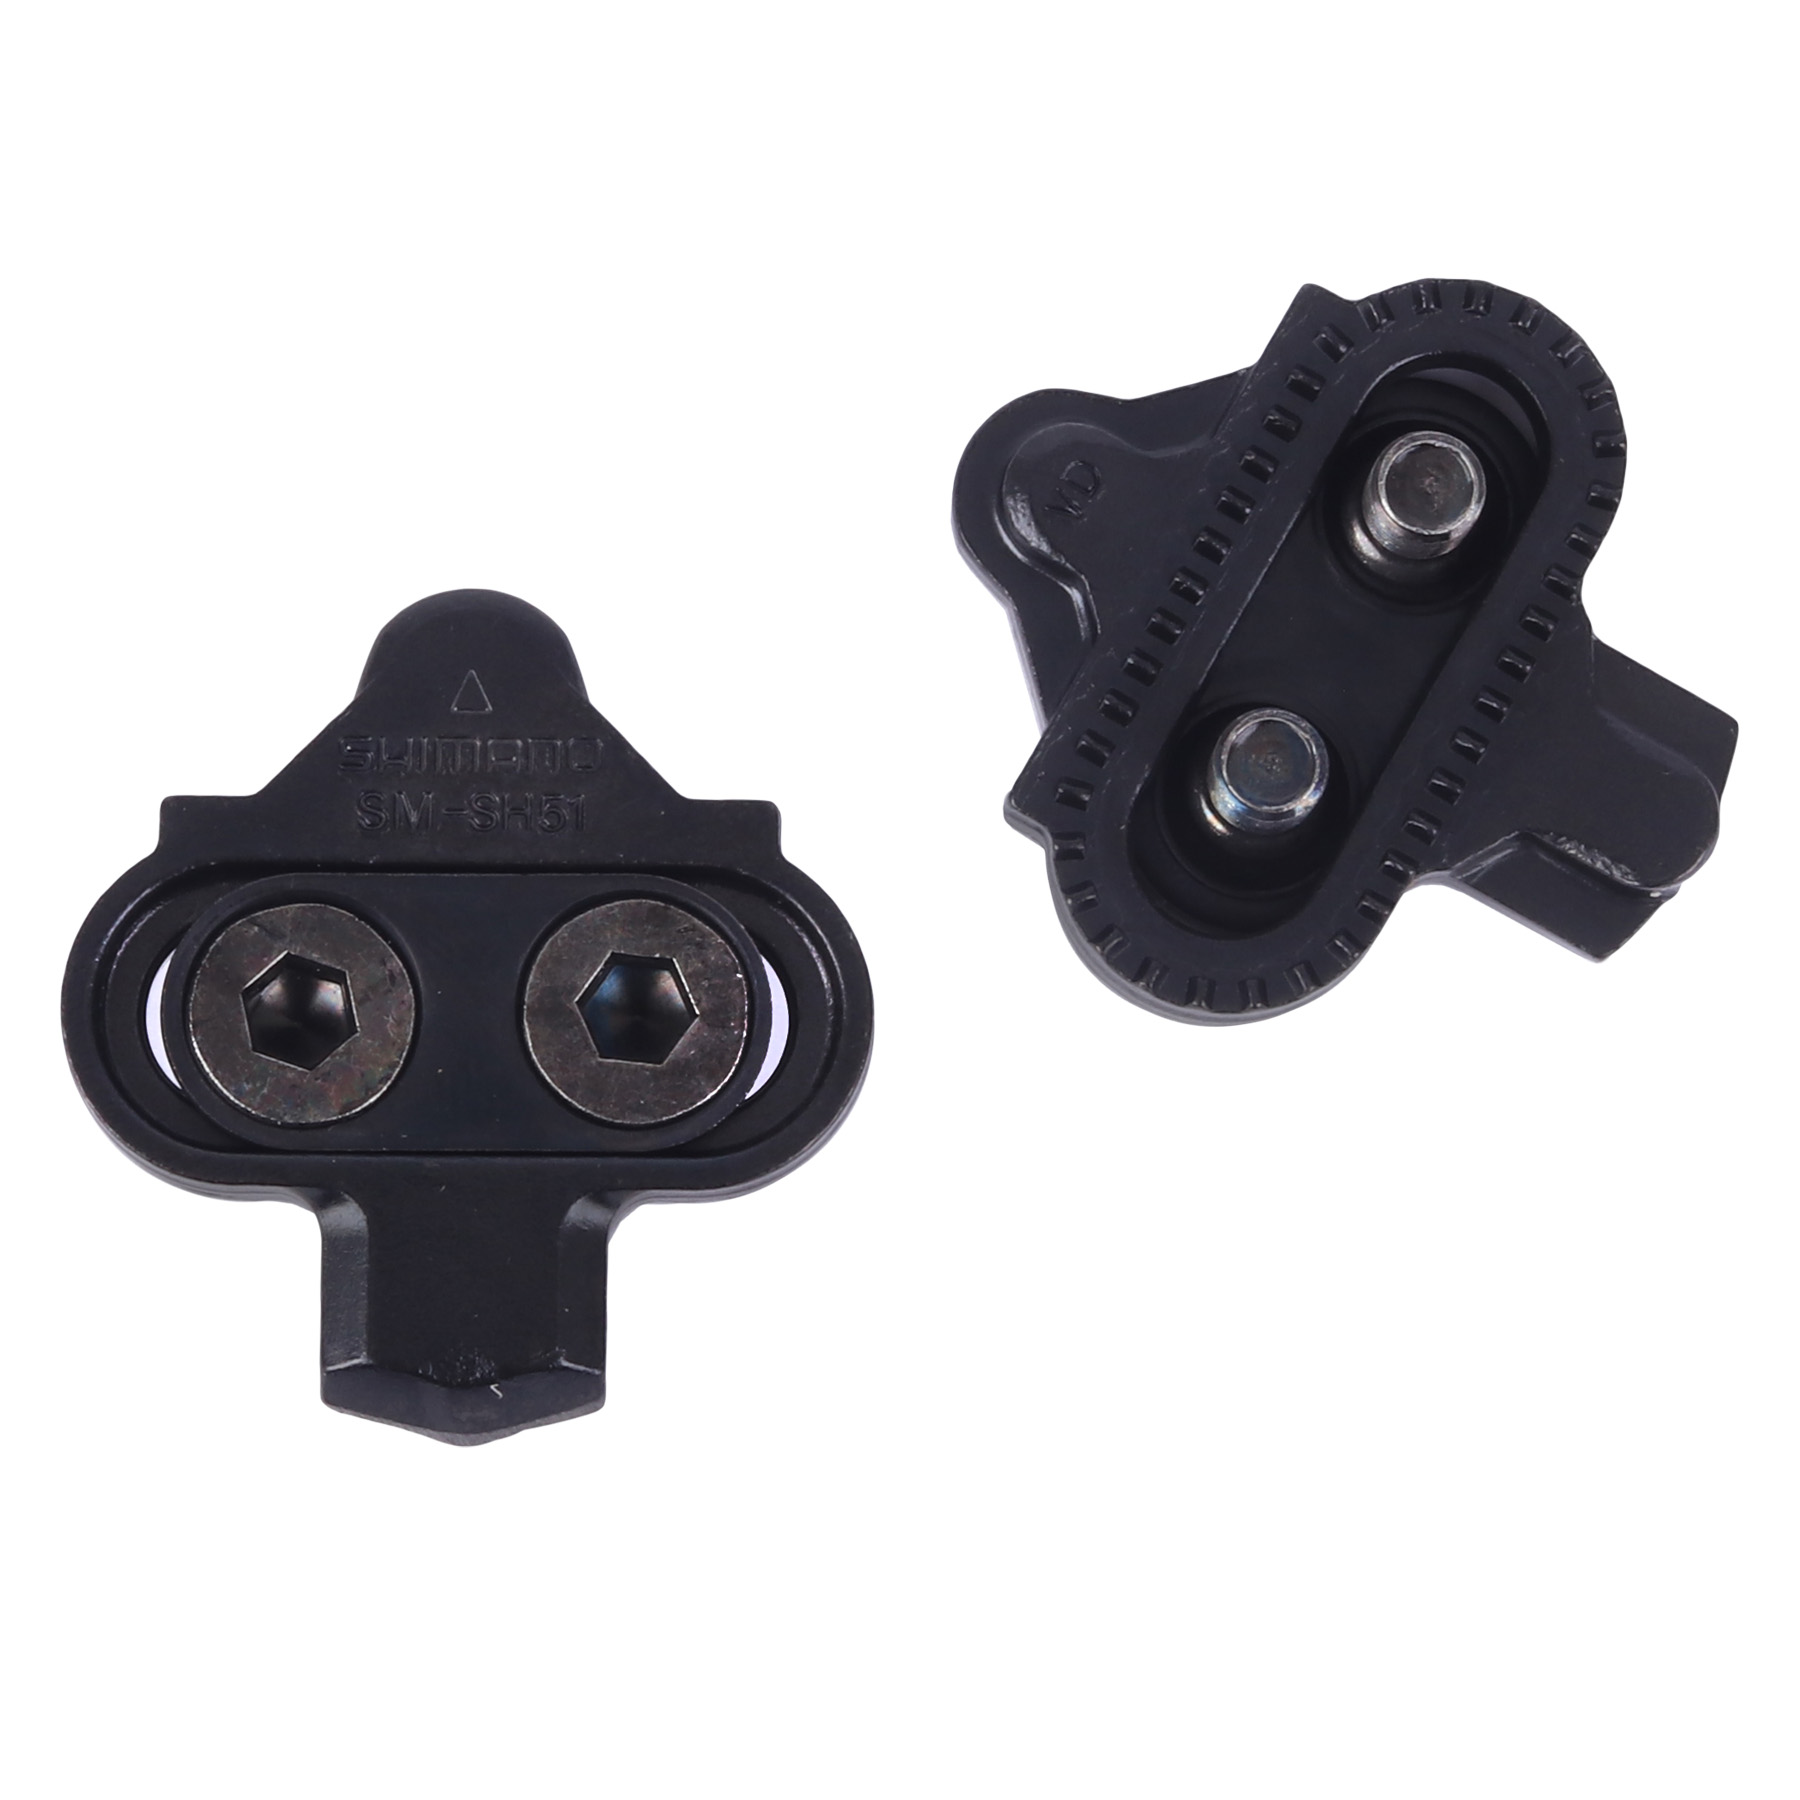 Picture of Shimano SM-SH51 SPD Cleats without Cleat Nut - black